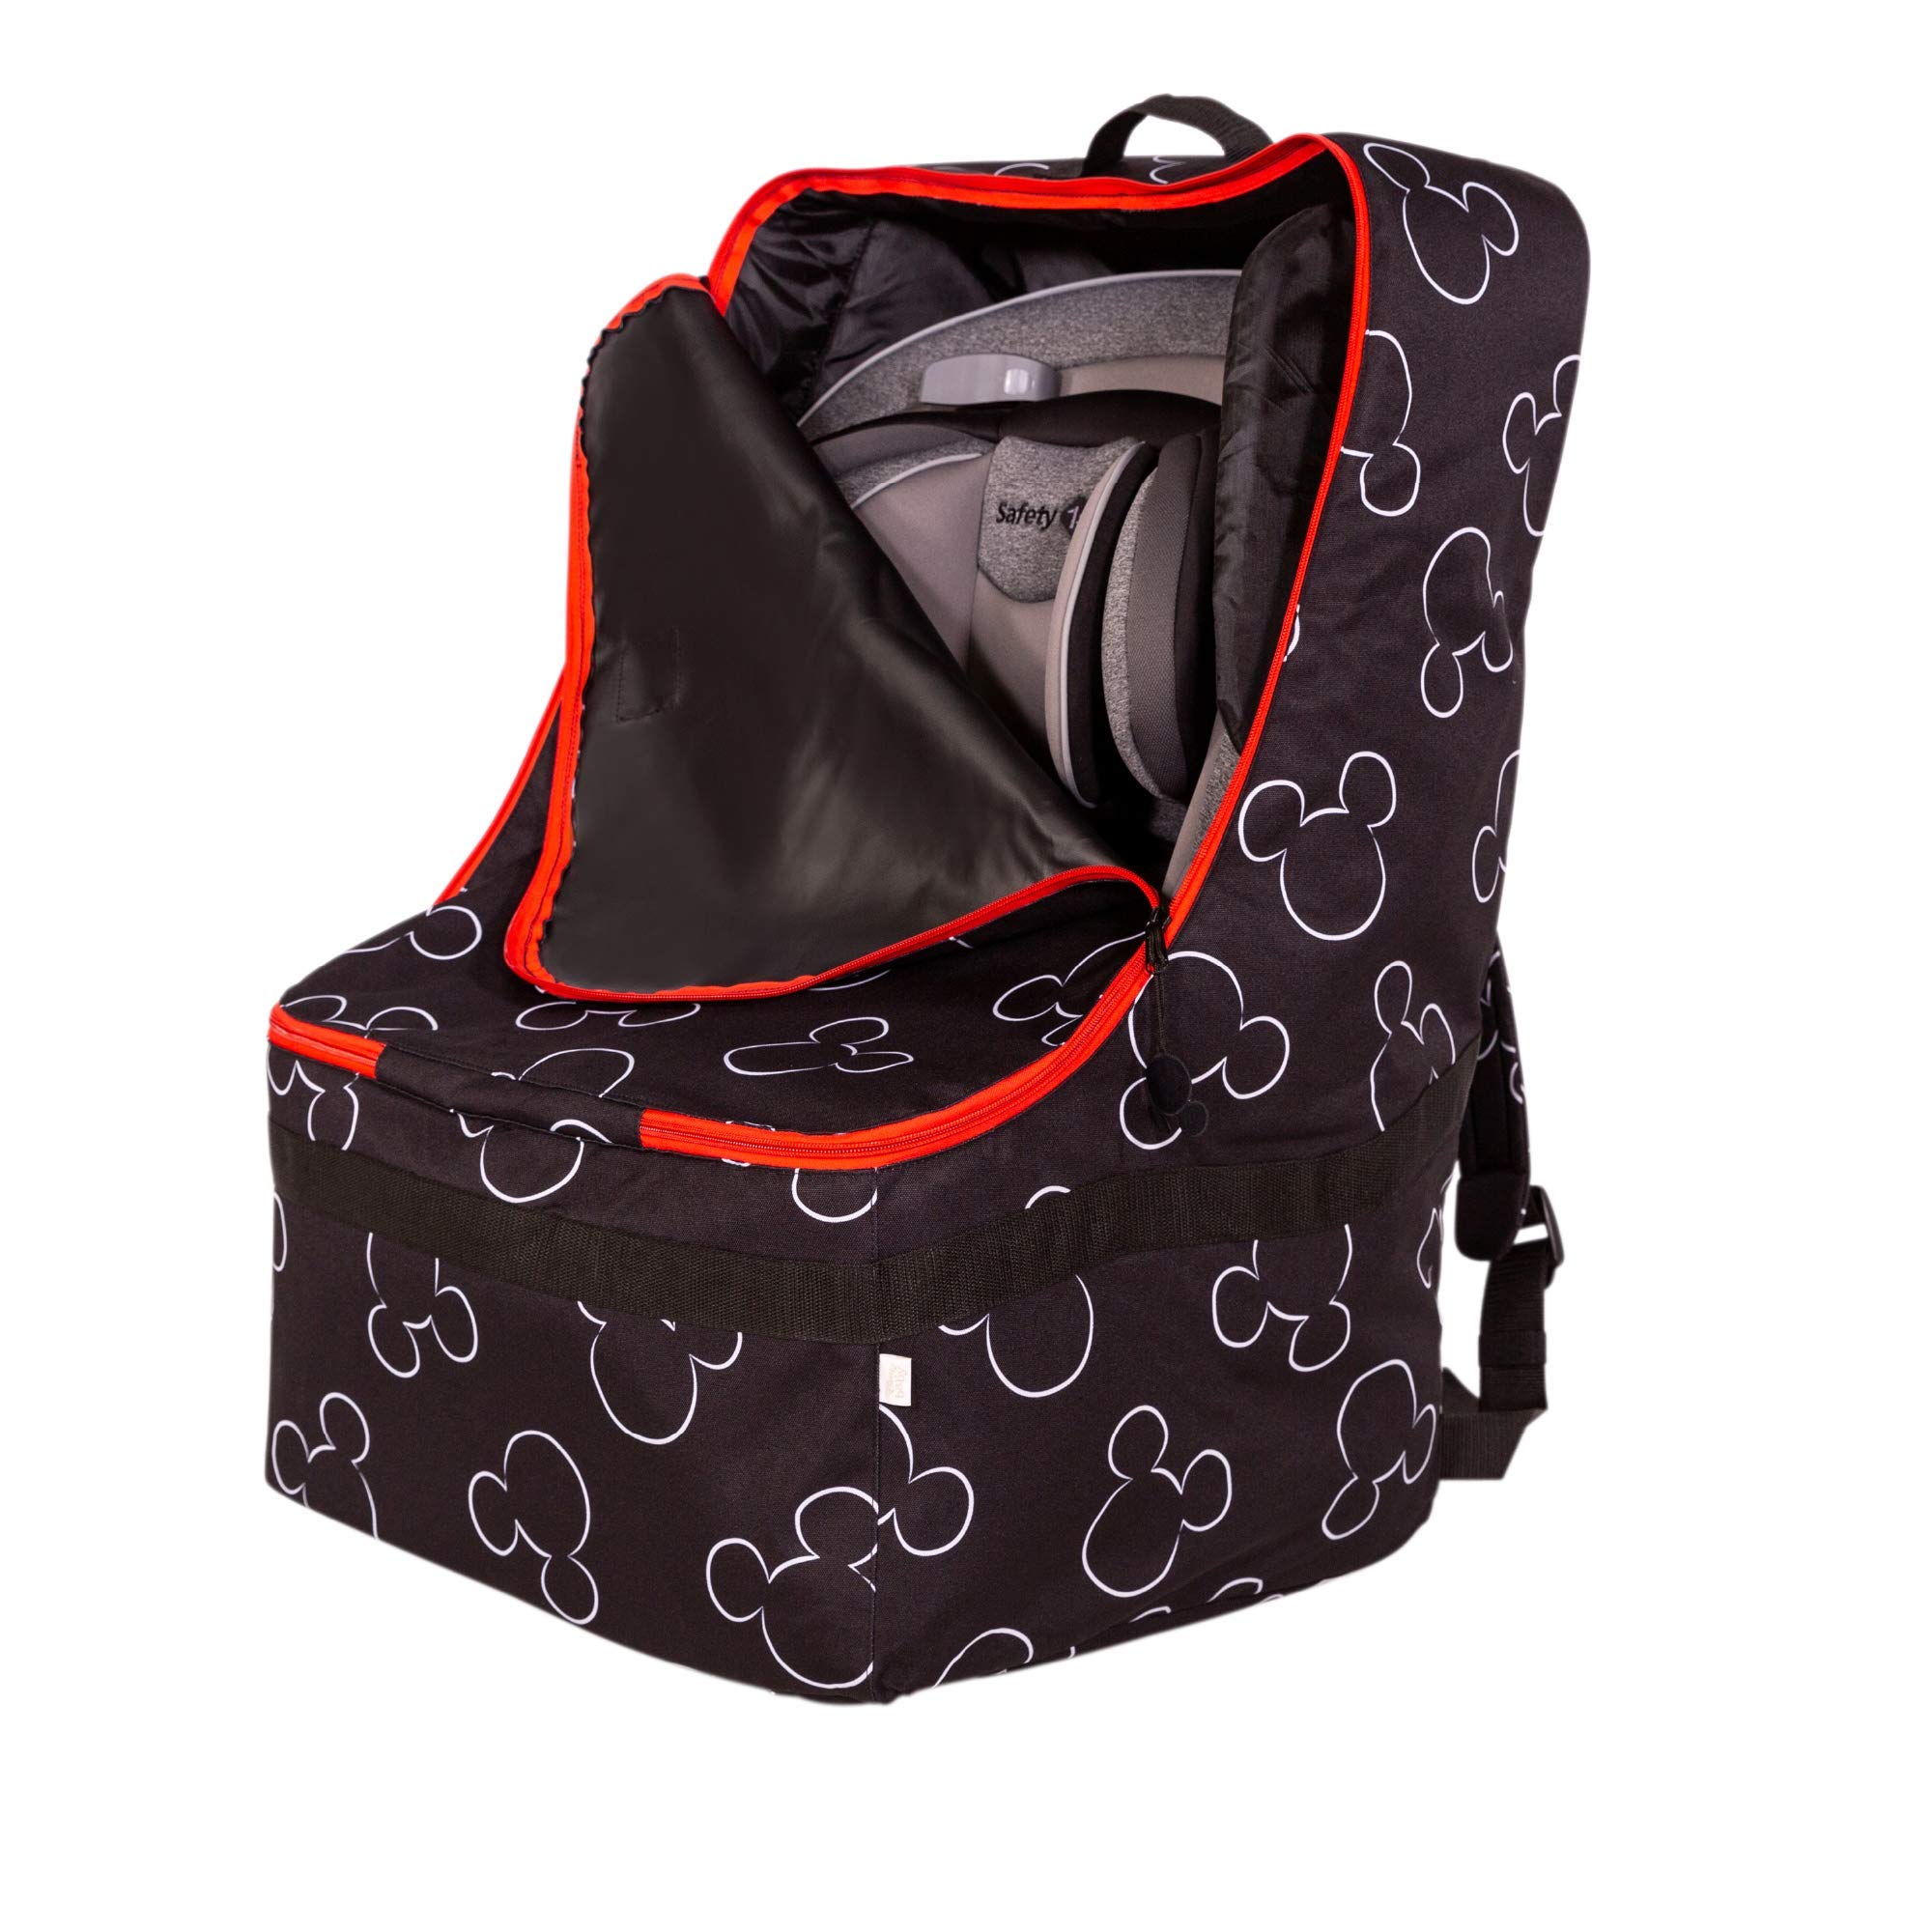 J.L. Childress Disney Baby Ultimate PREMIUM Backpack Padded Car Seat Travel Bag - Car Seat Gate Check Bag - Fits All Car Seats & Booster Seats - Mickey Mouse